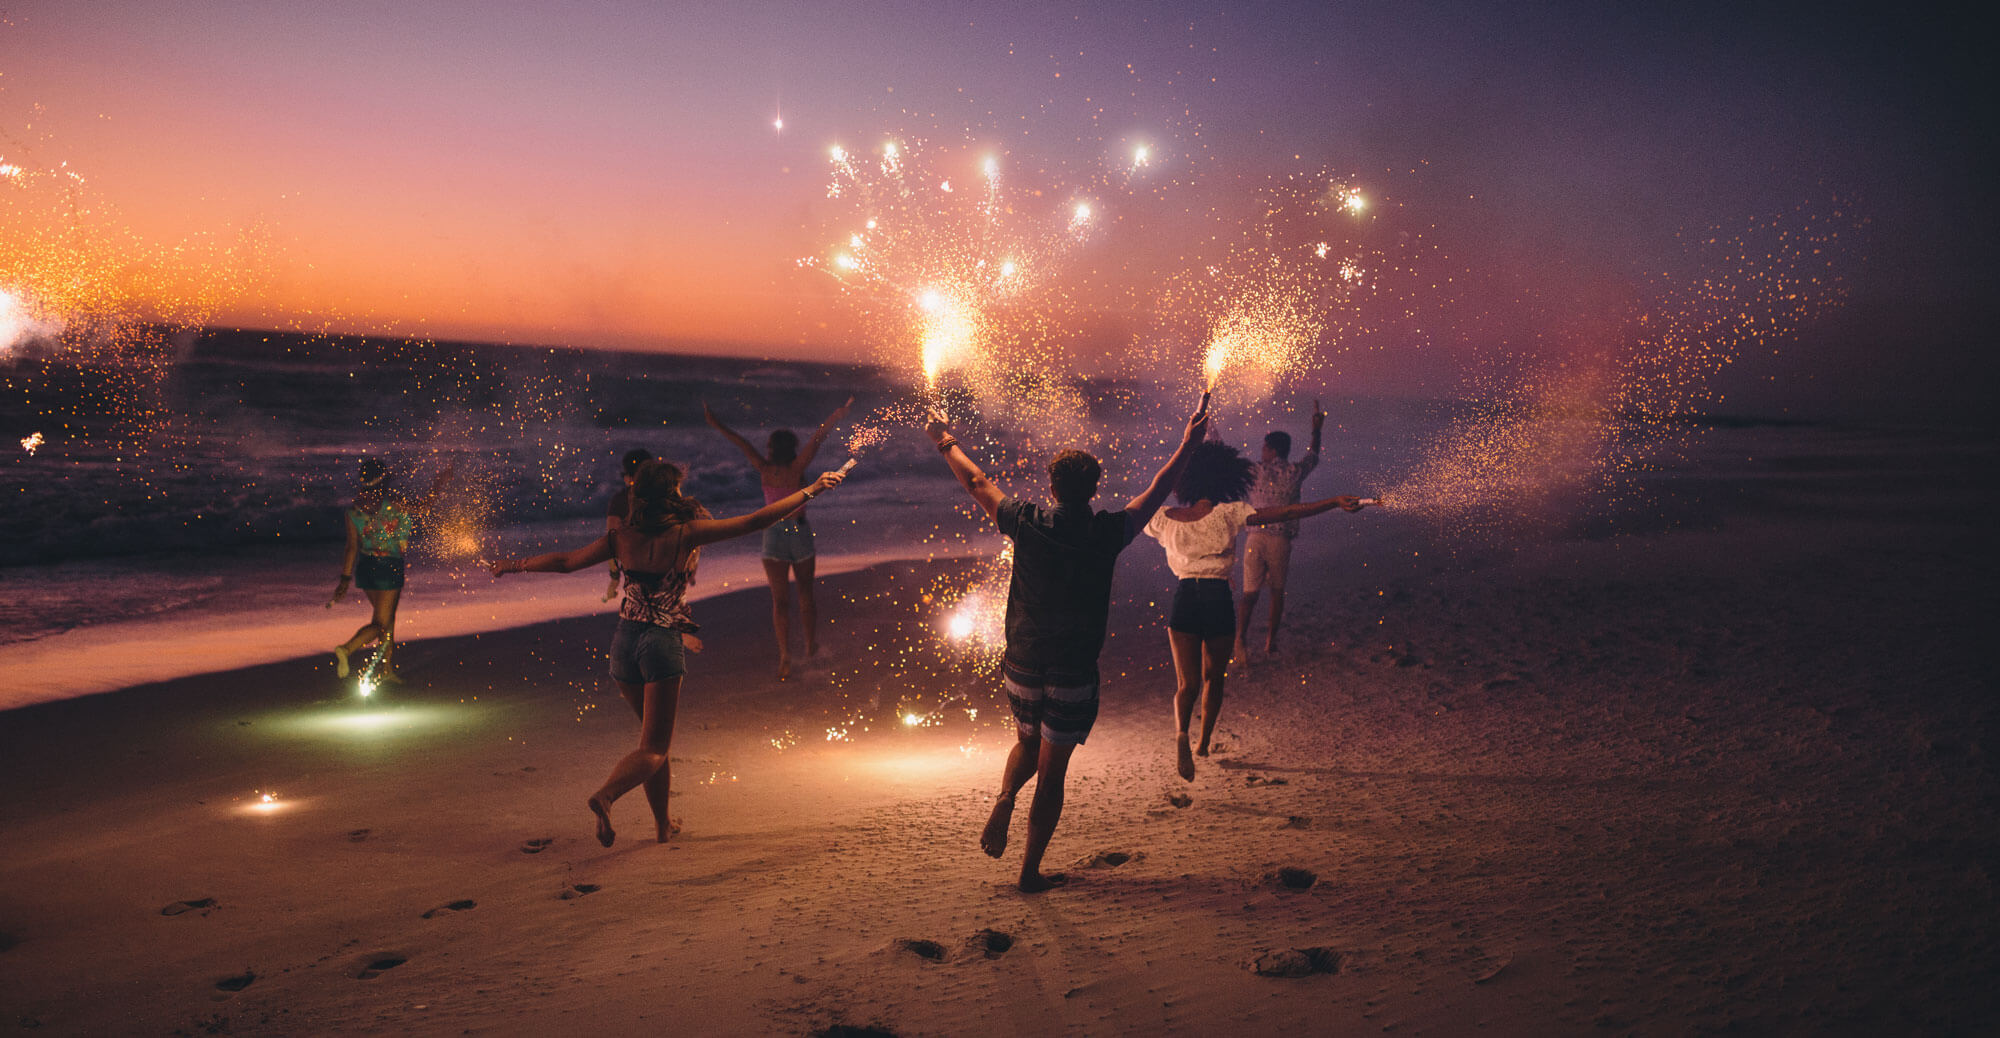 Friends running with fireworks on a beach after sunset